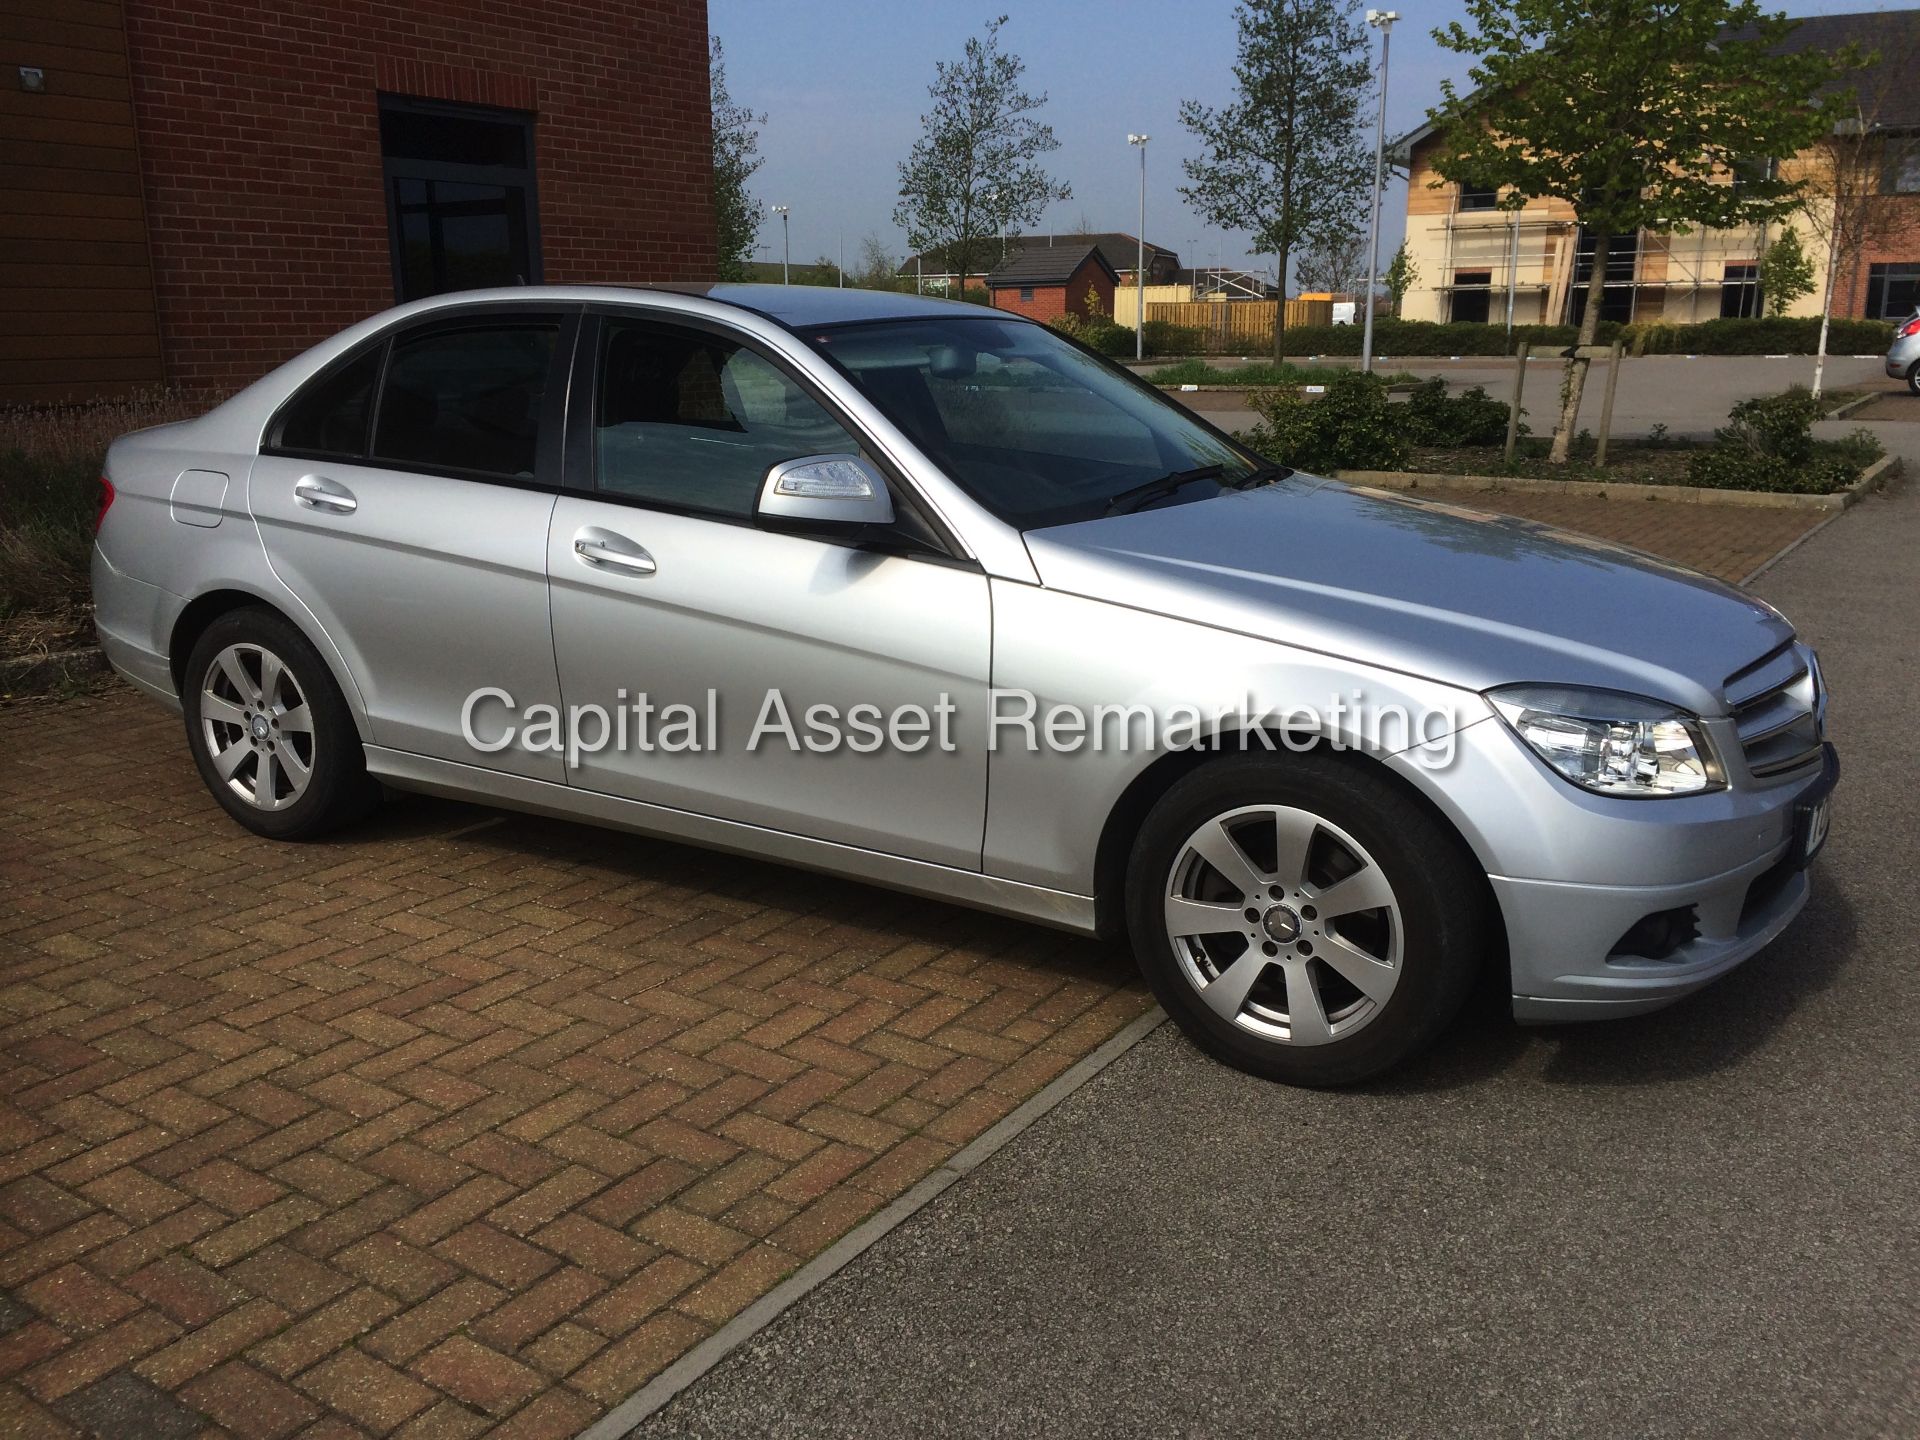 MERCEDES C220CDI (AUTO) "SE - SPECIAL EQUIPMENT" ONLY 53000 MILES FROM NEW!! FULL HISTORY!! NO VAT